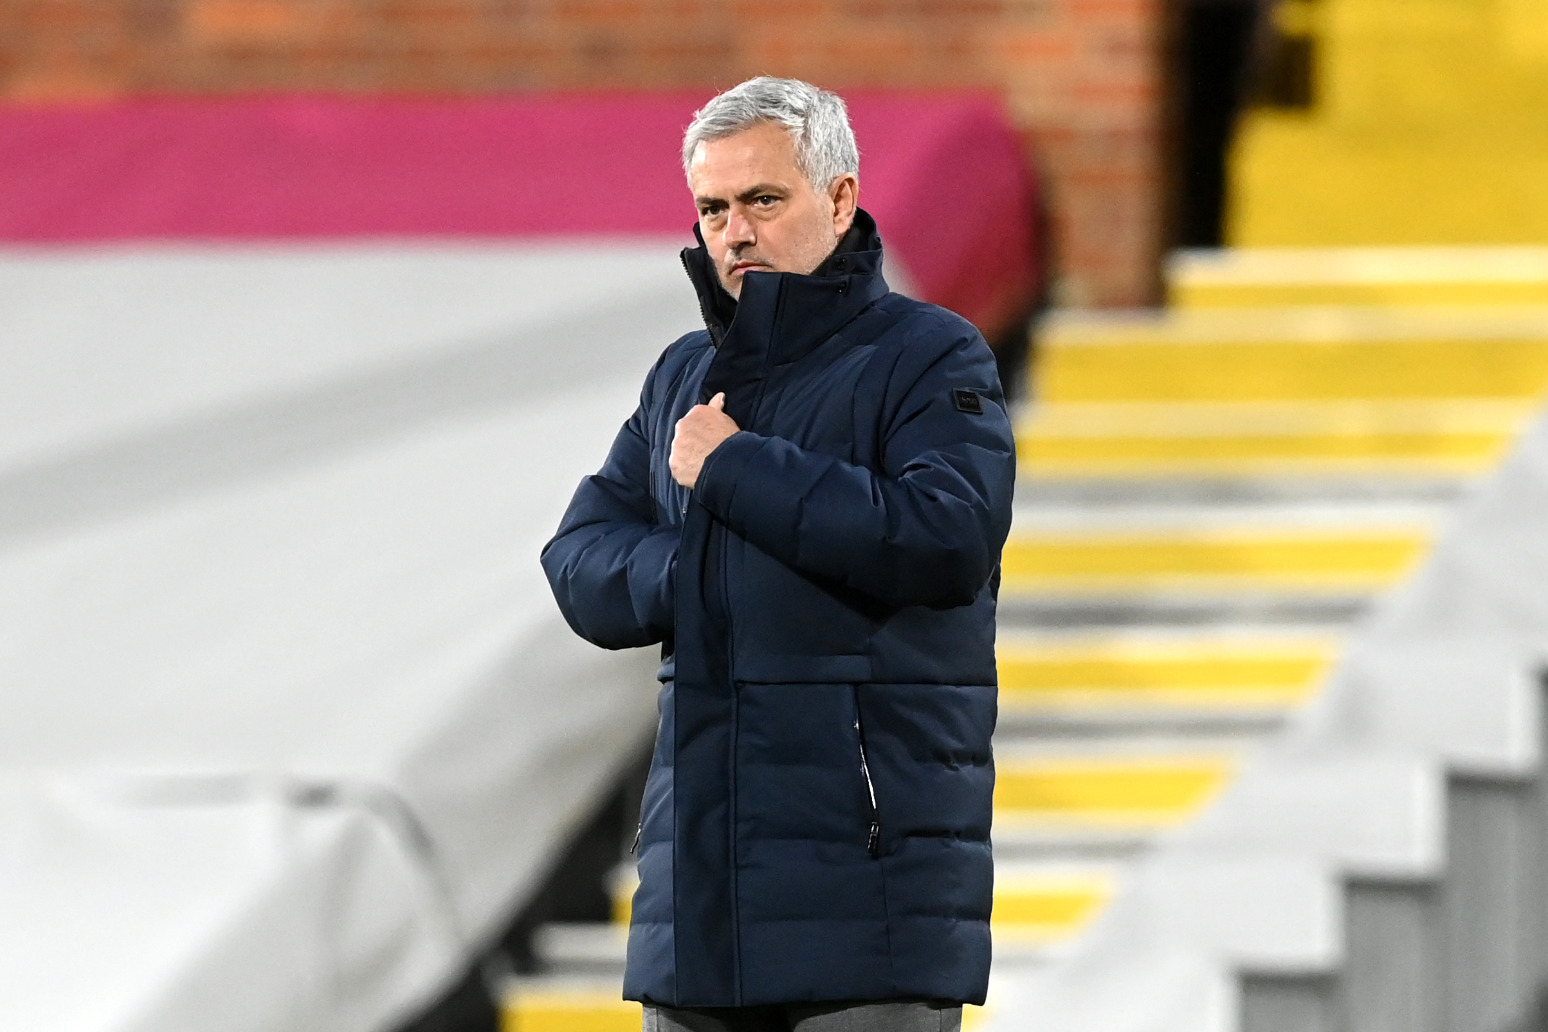 Jose Mourinho sees red as Cremonese beat Roma to end long wait for a win 